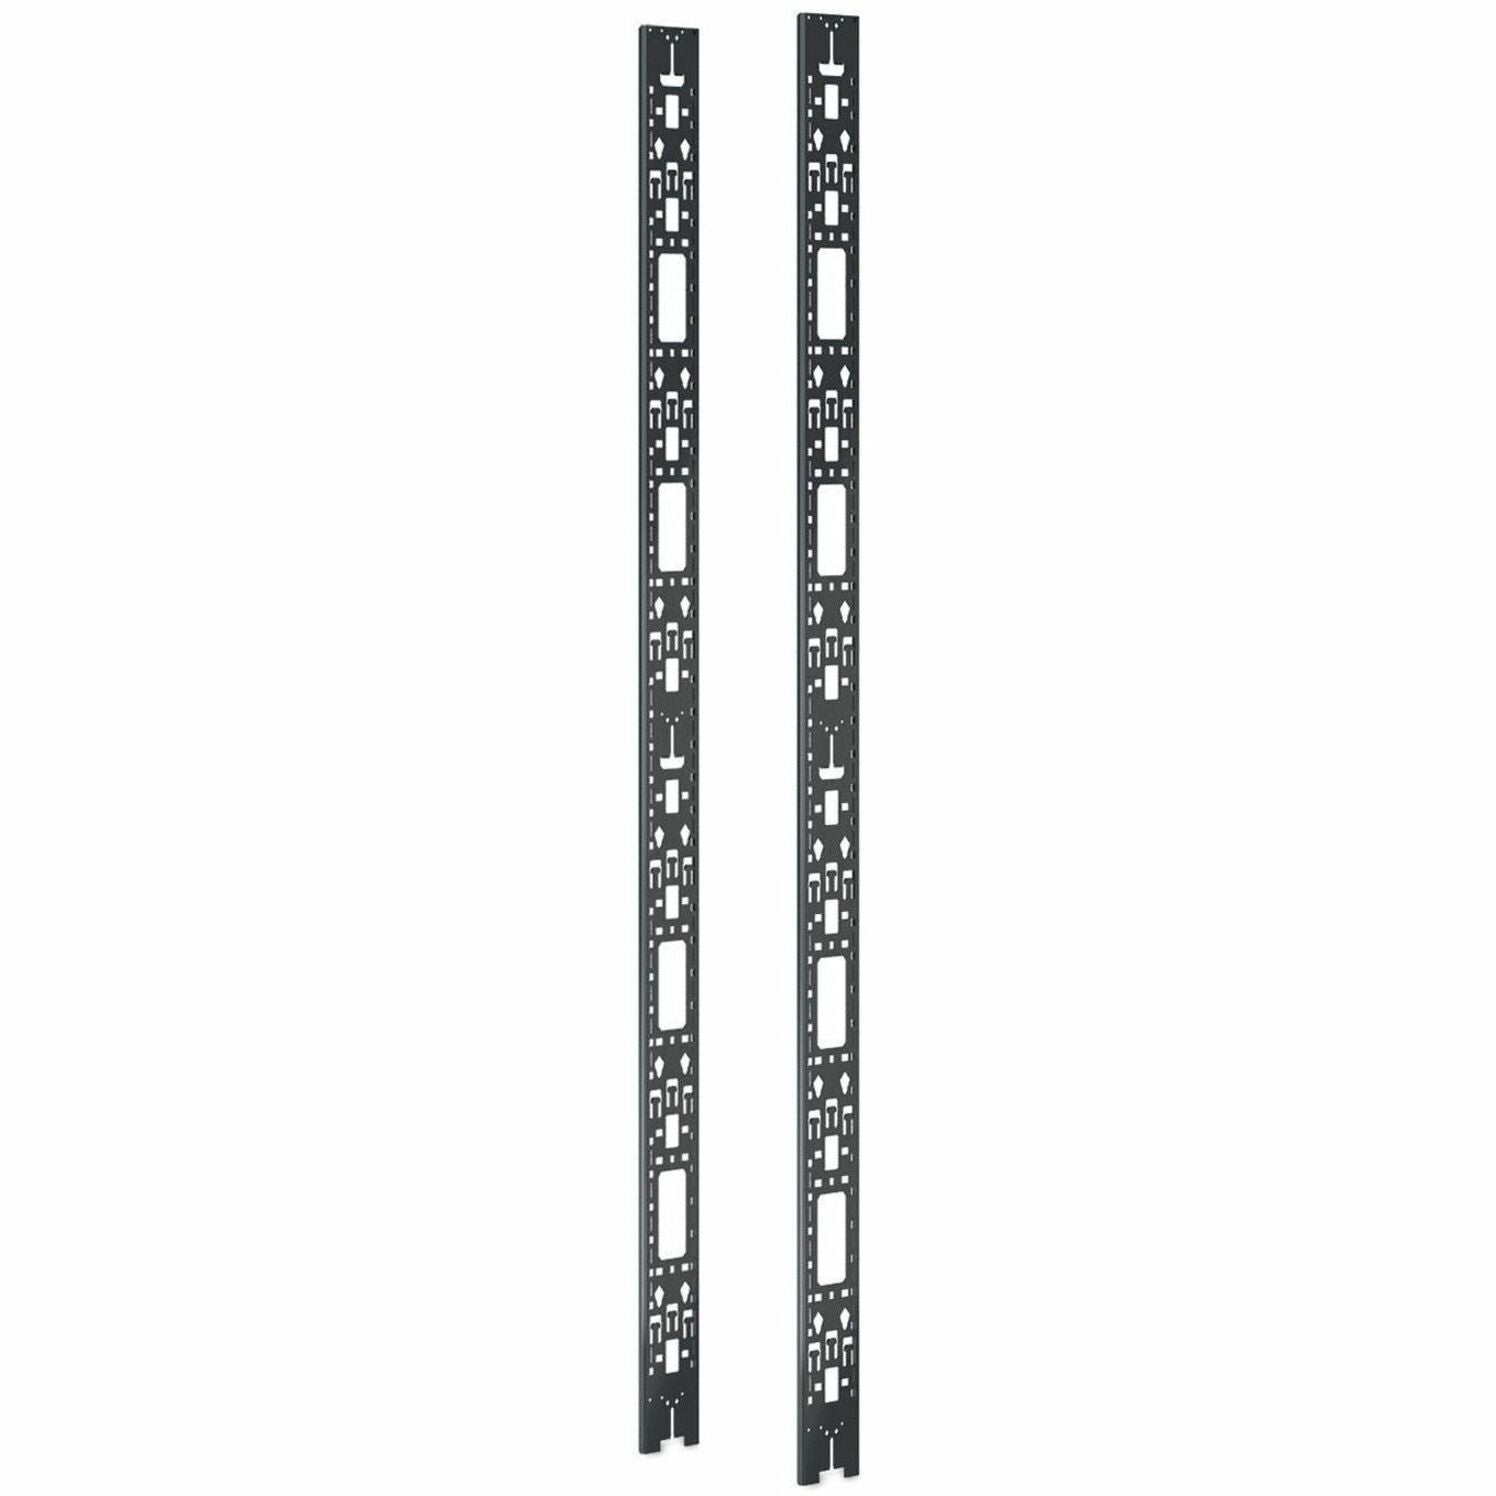 APC NetShelter SX AR7572 Vertical PDU Mount and Cable Organizer